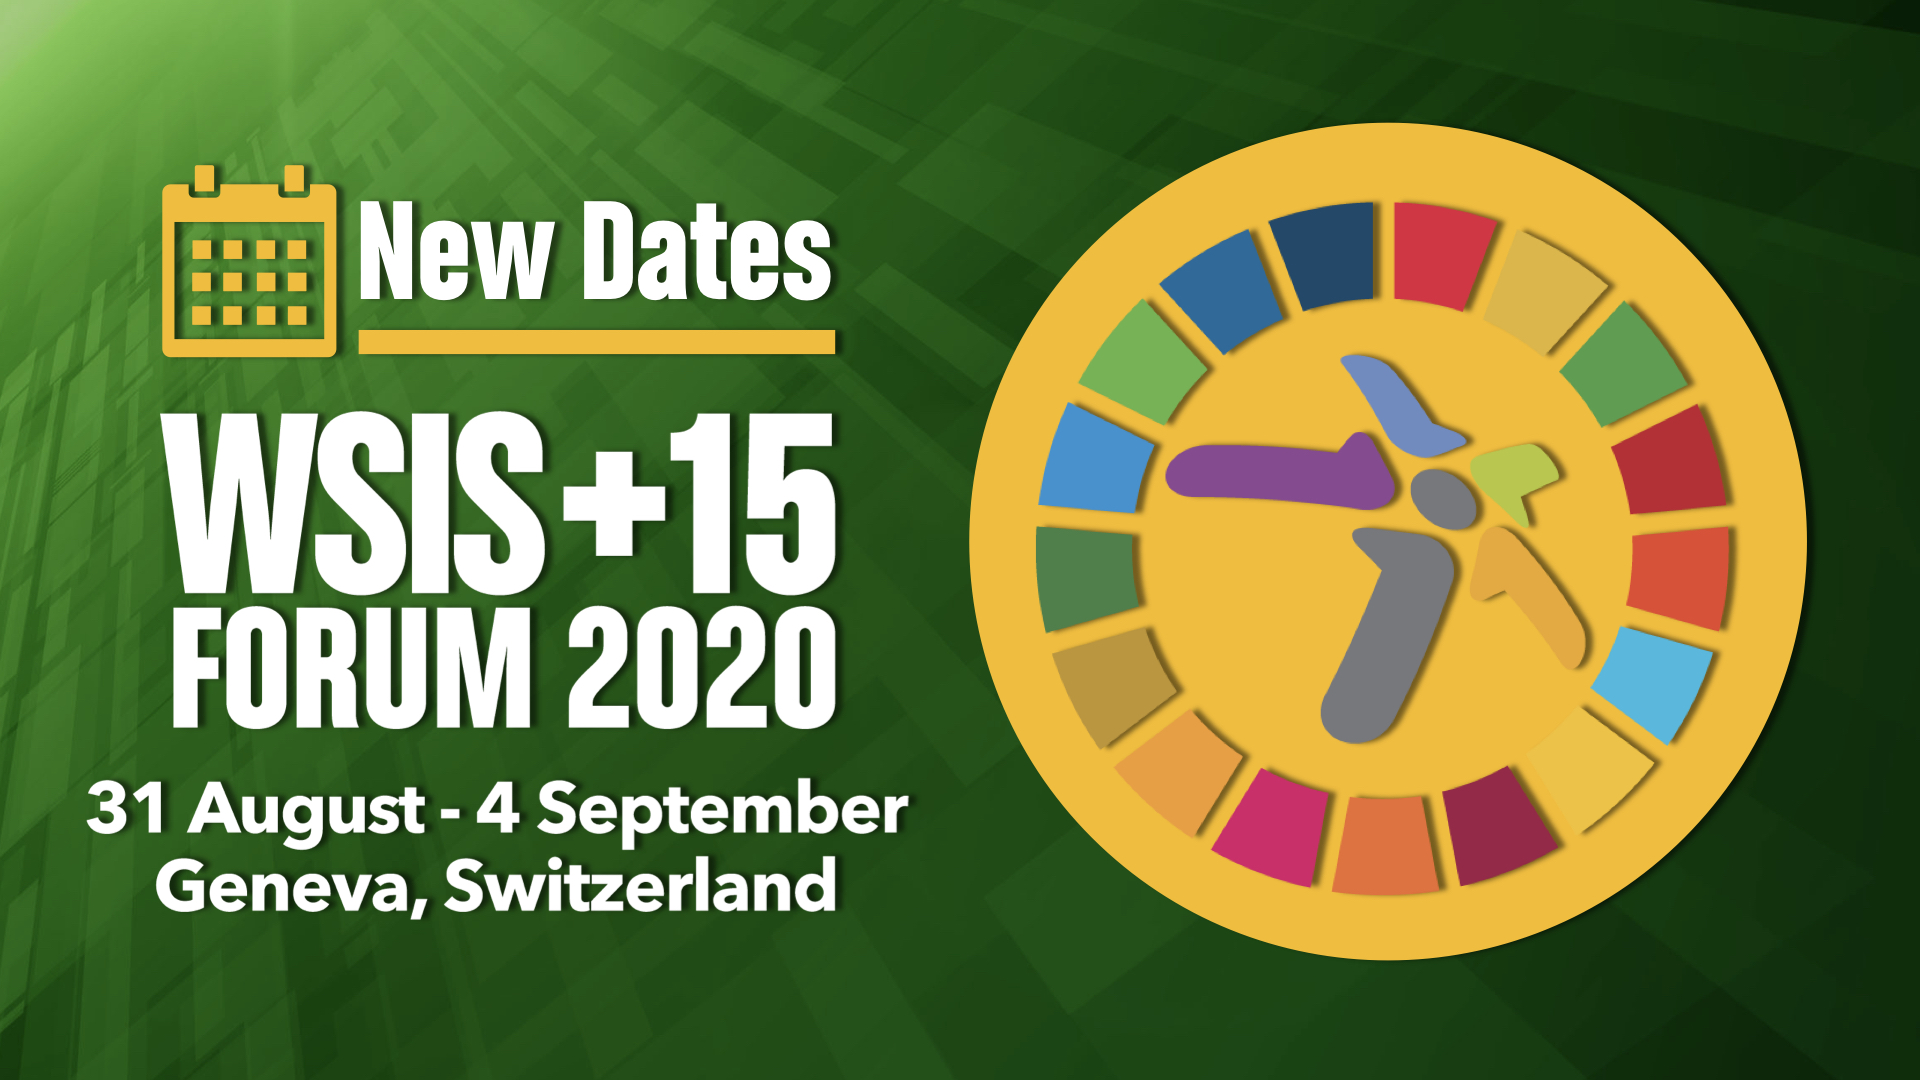 New Dates for WSIS Forum 2020: 31st August to 4th September 2020.